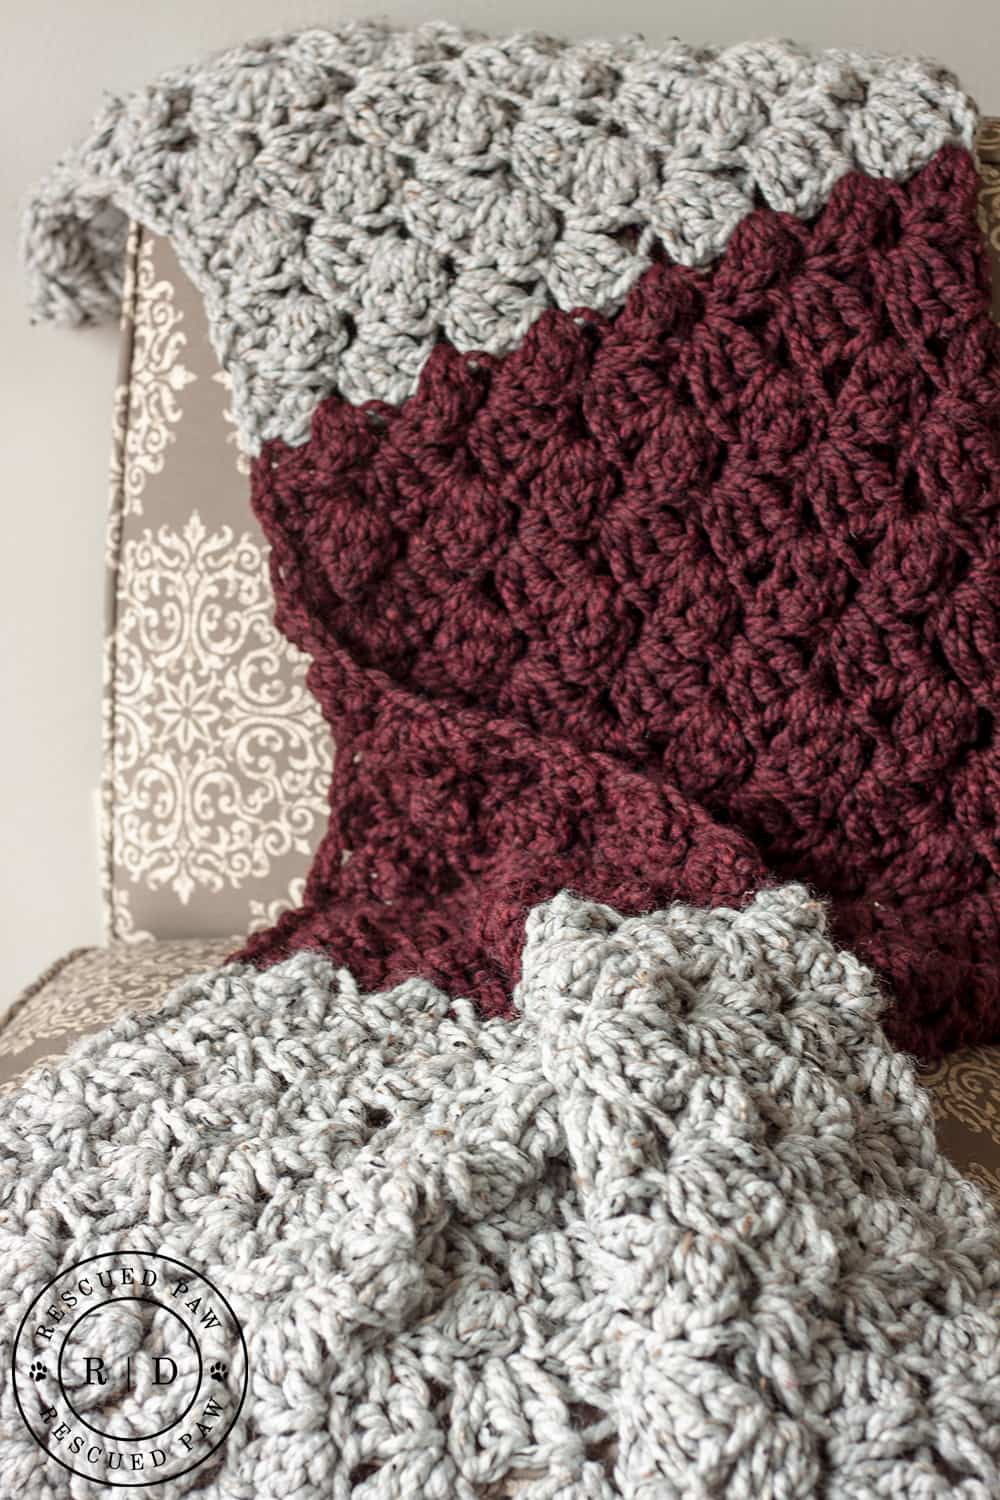 Crochet Patterns Free Afghan The 11 Best Afghan Crochet Patterns The Eleven Best